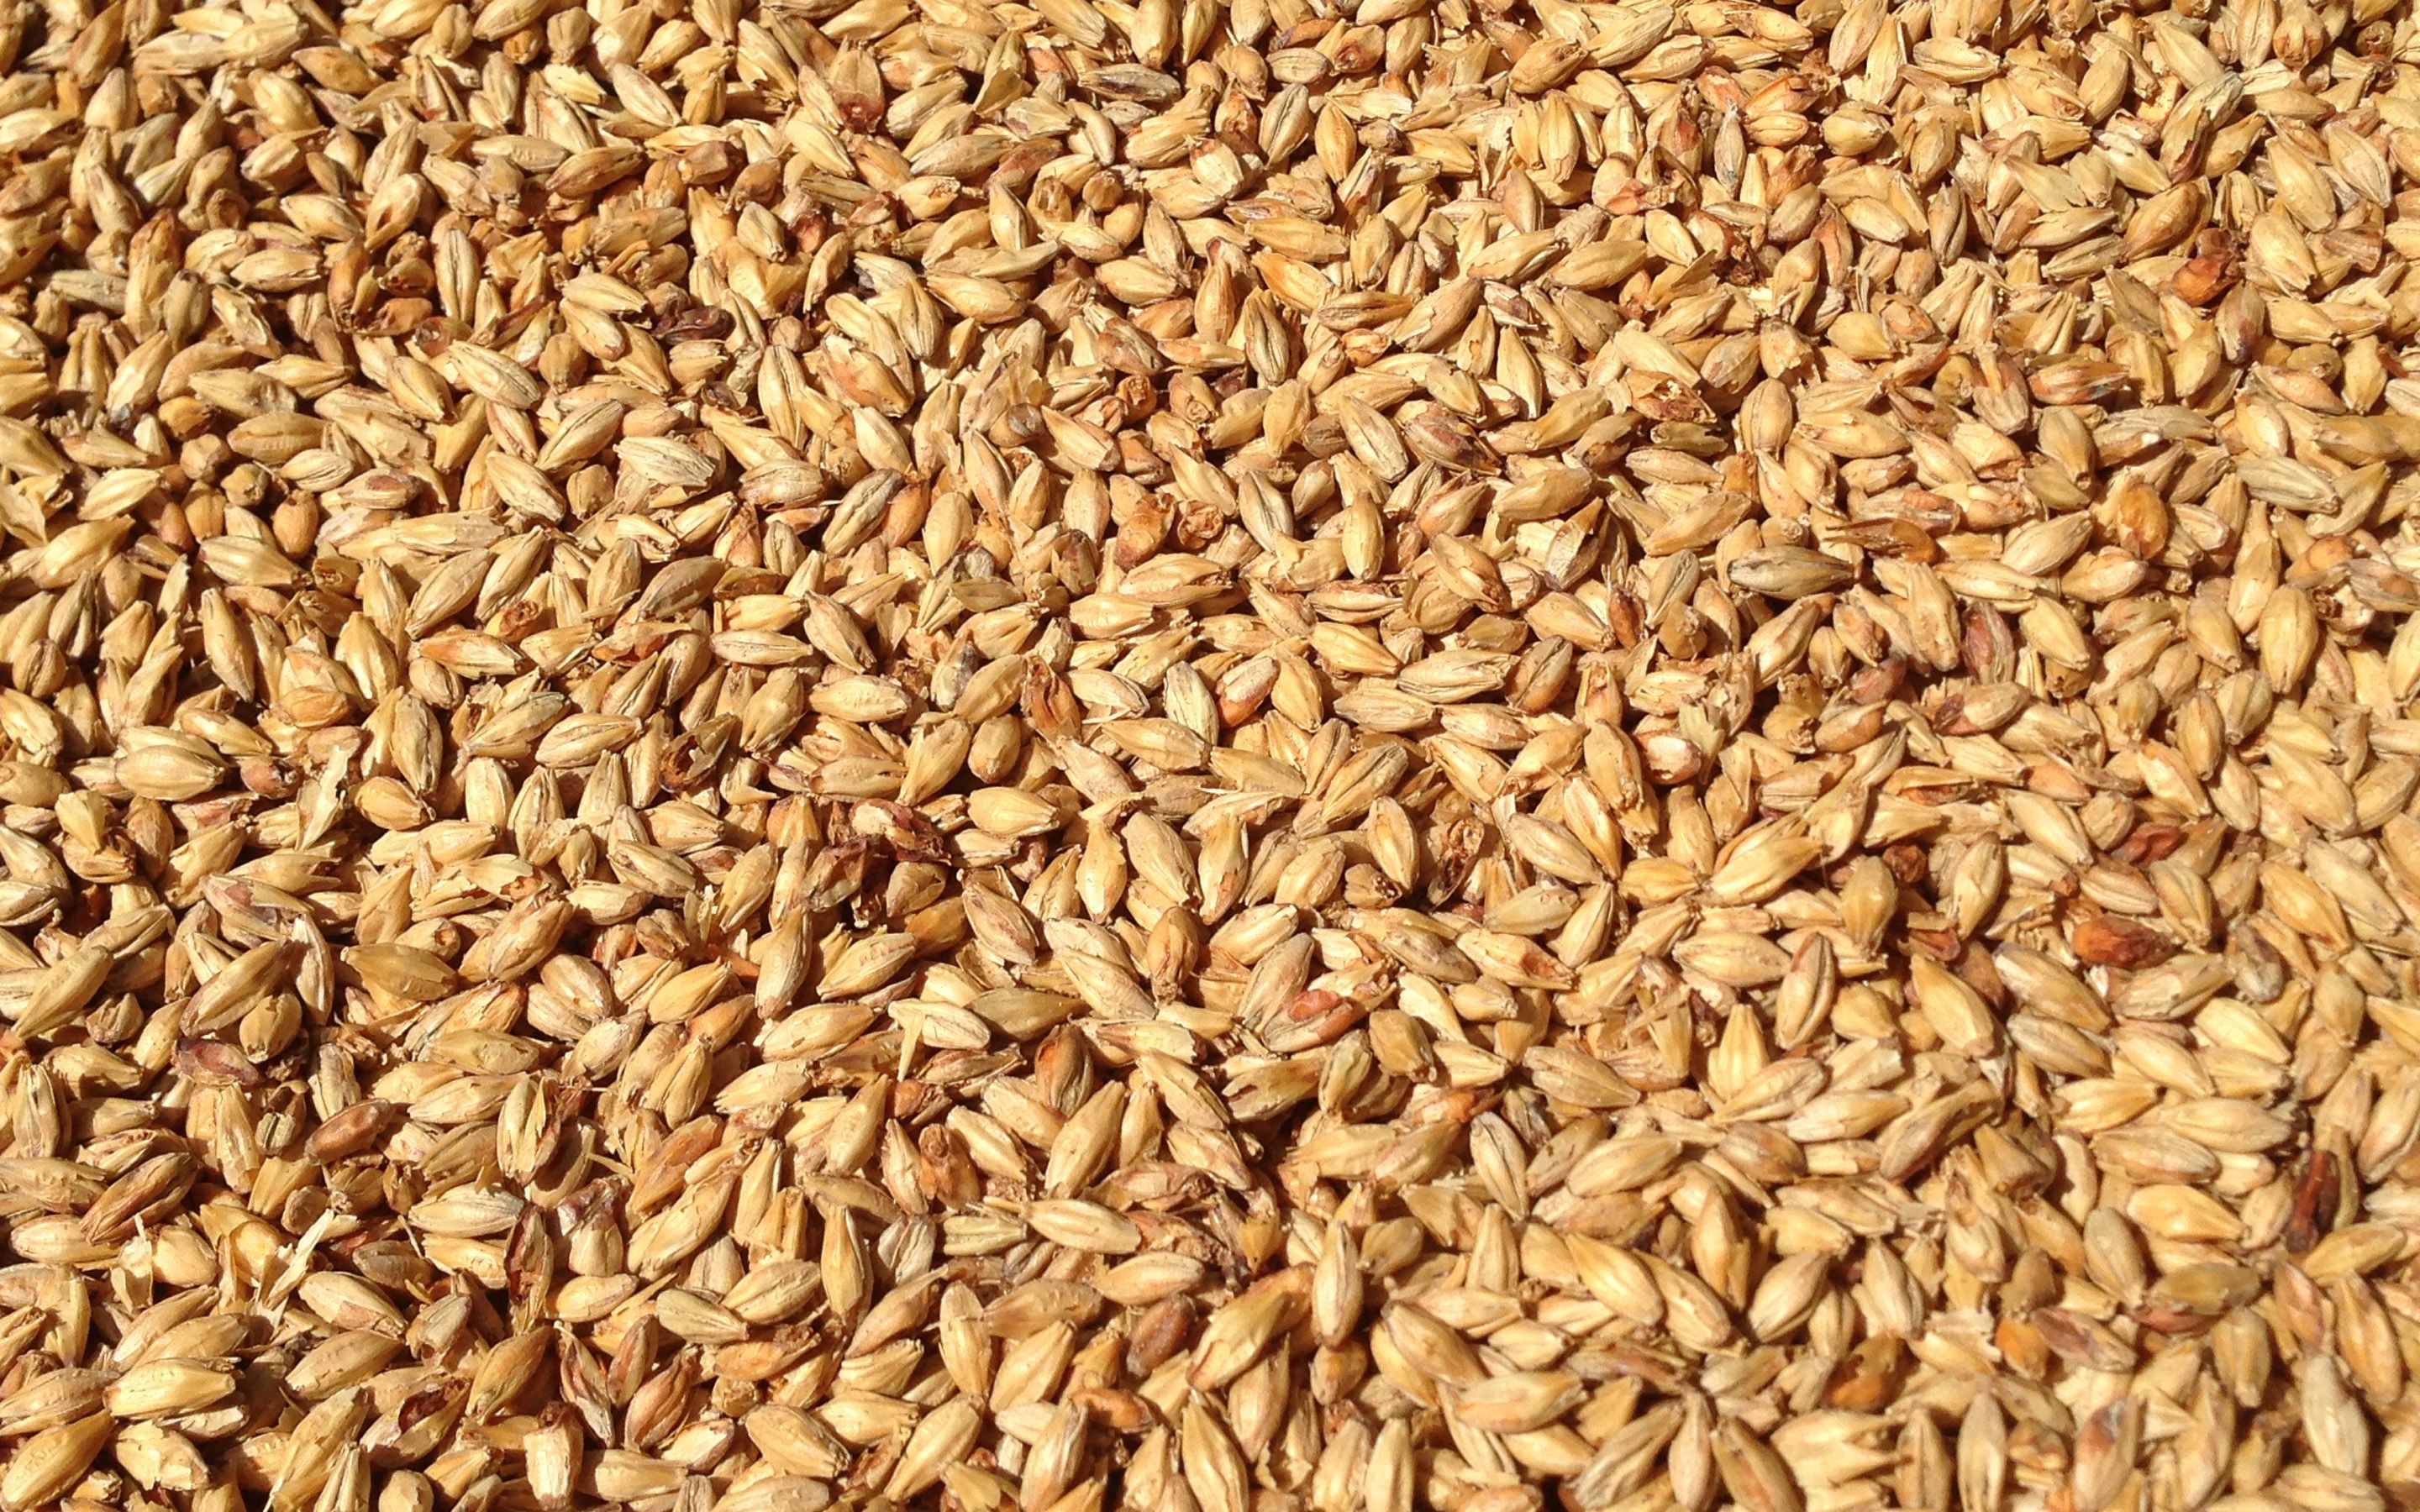 Download wallpaper wheat grains texture, wheat harvest concepts, wheat background, cereals, wheat texture for desktop with resolution 2880x1800. High Quality HD picture wallpaper